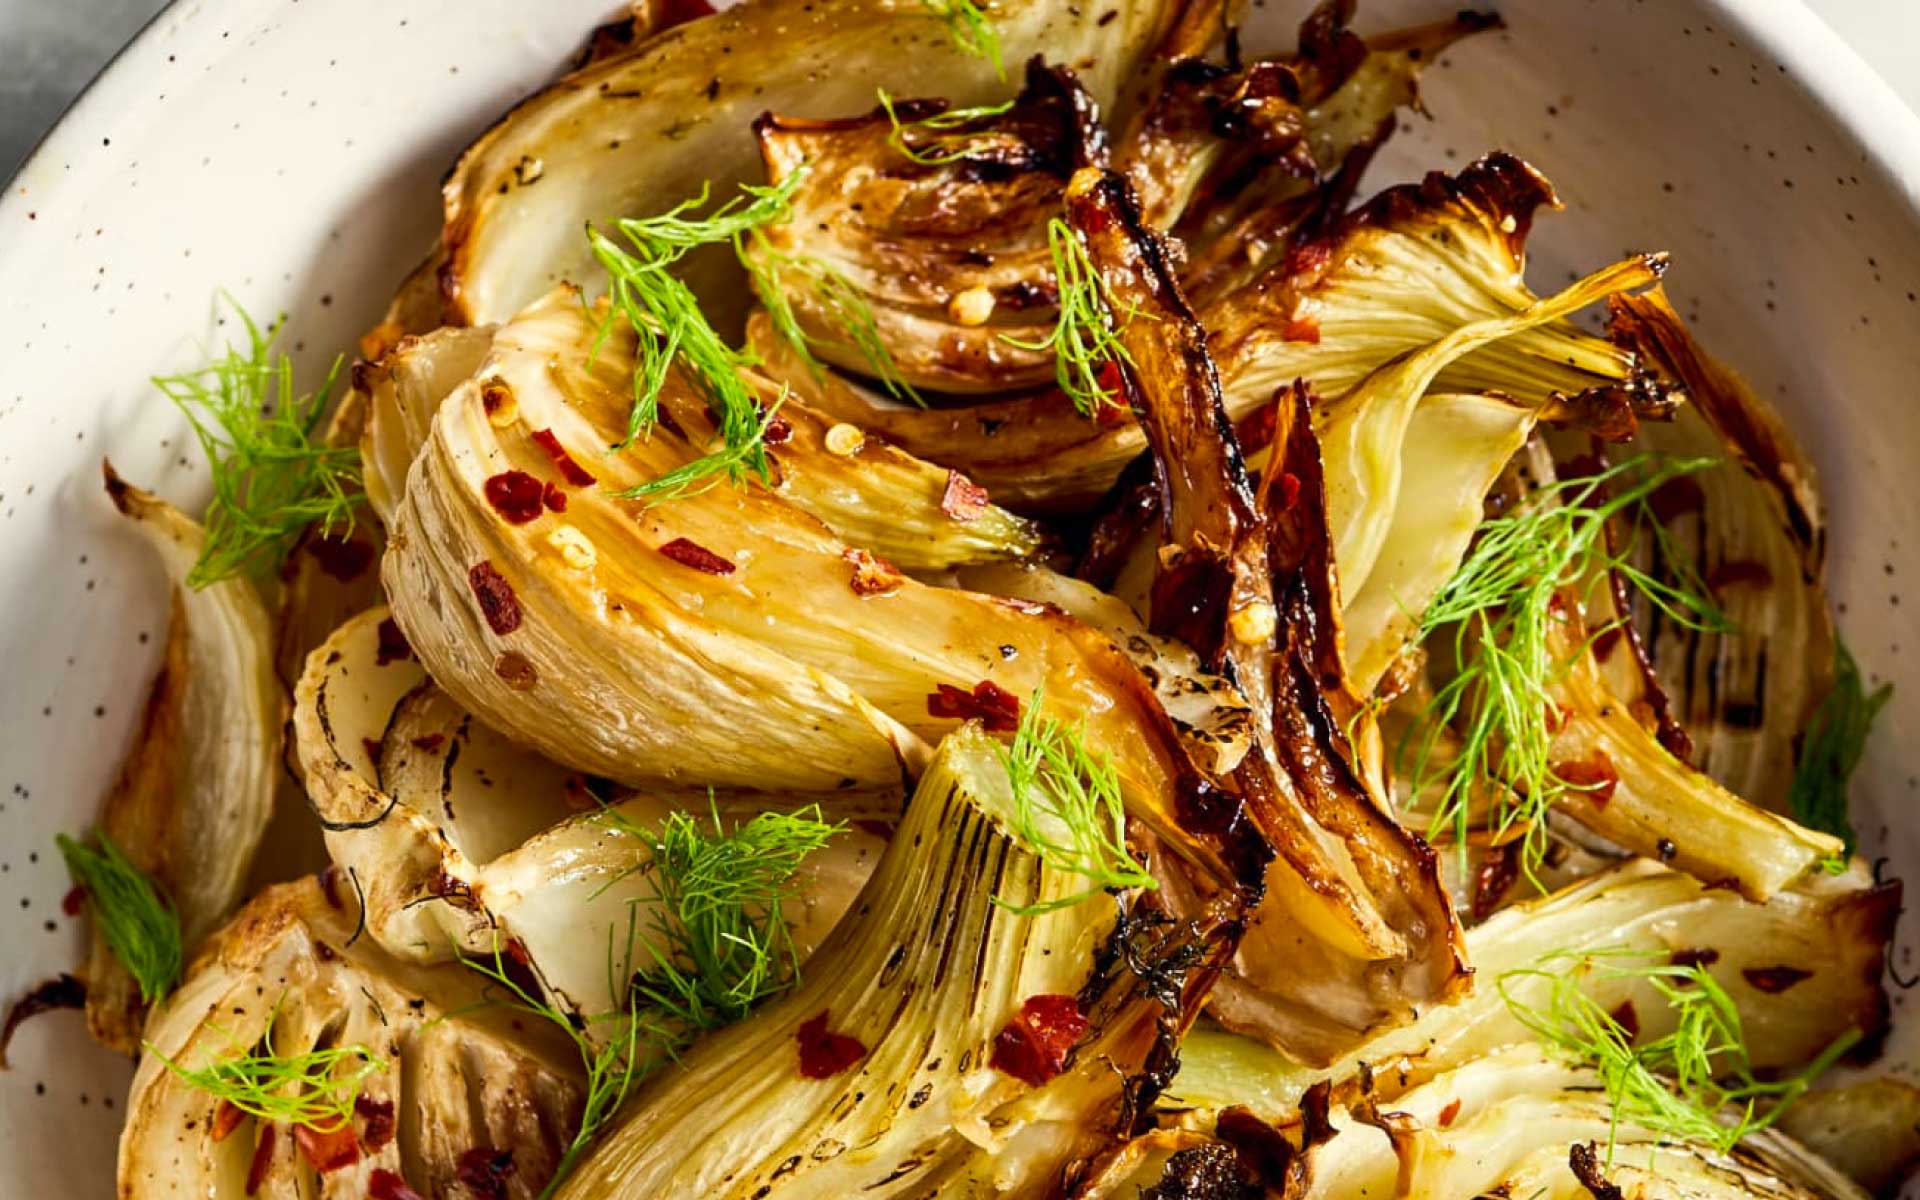 Baked fennel with thyme